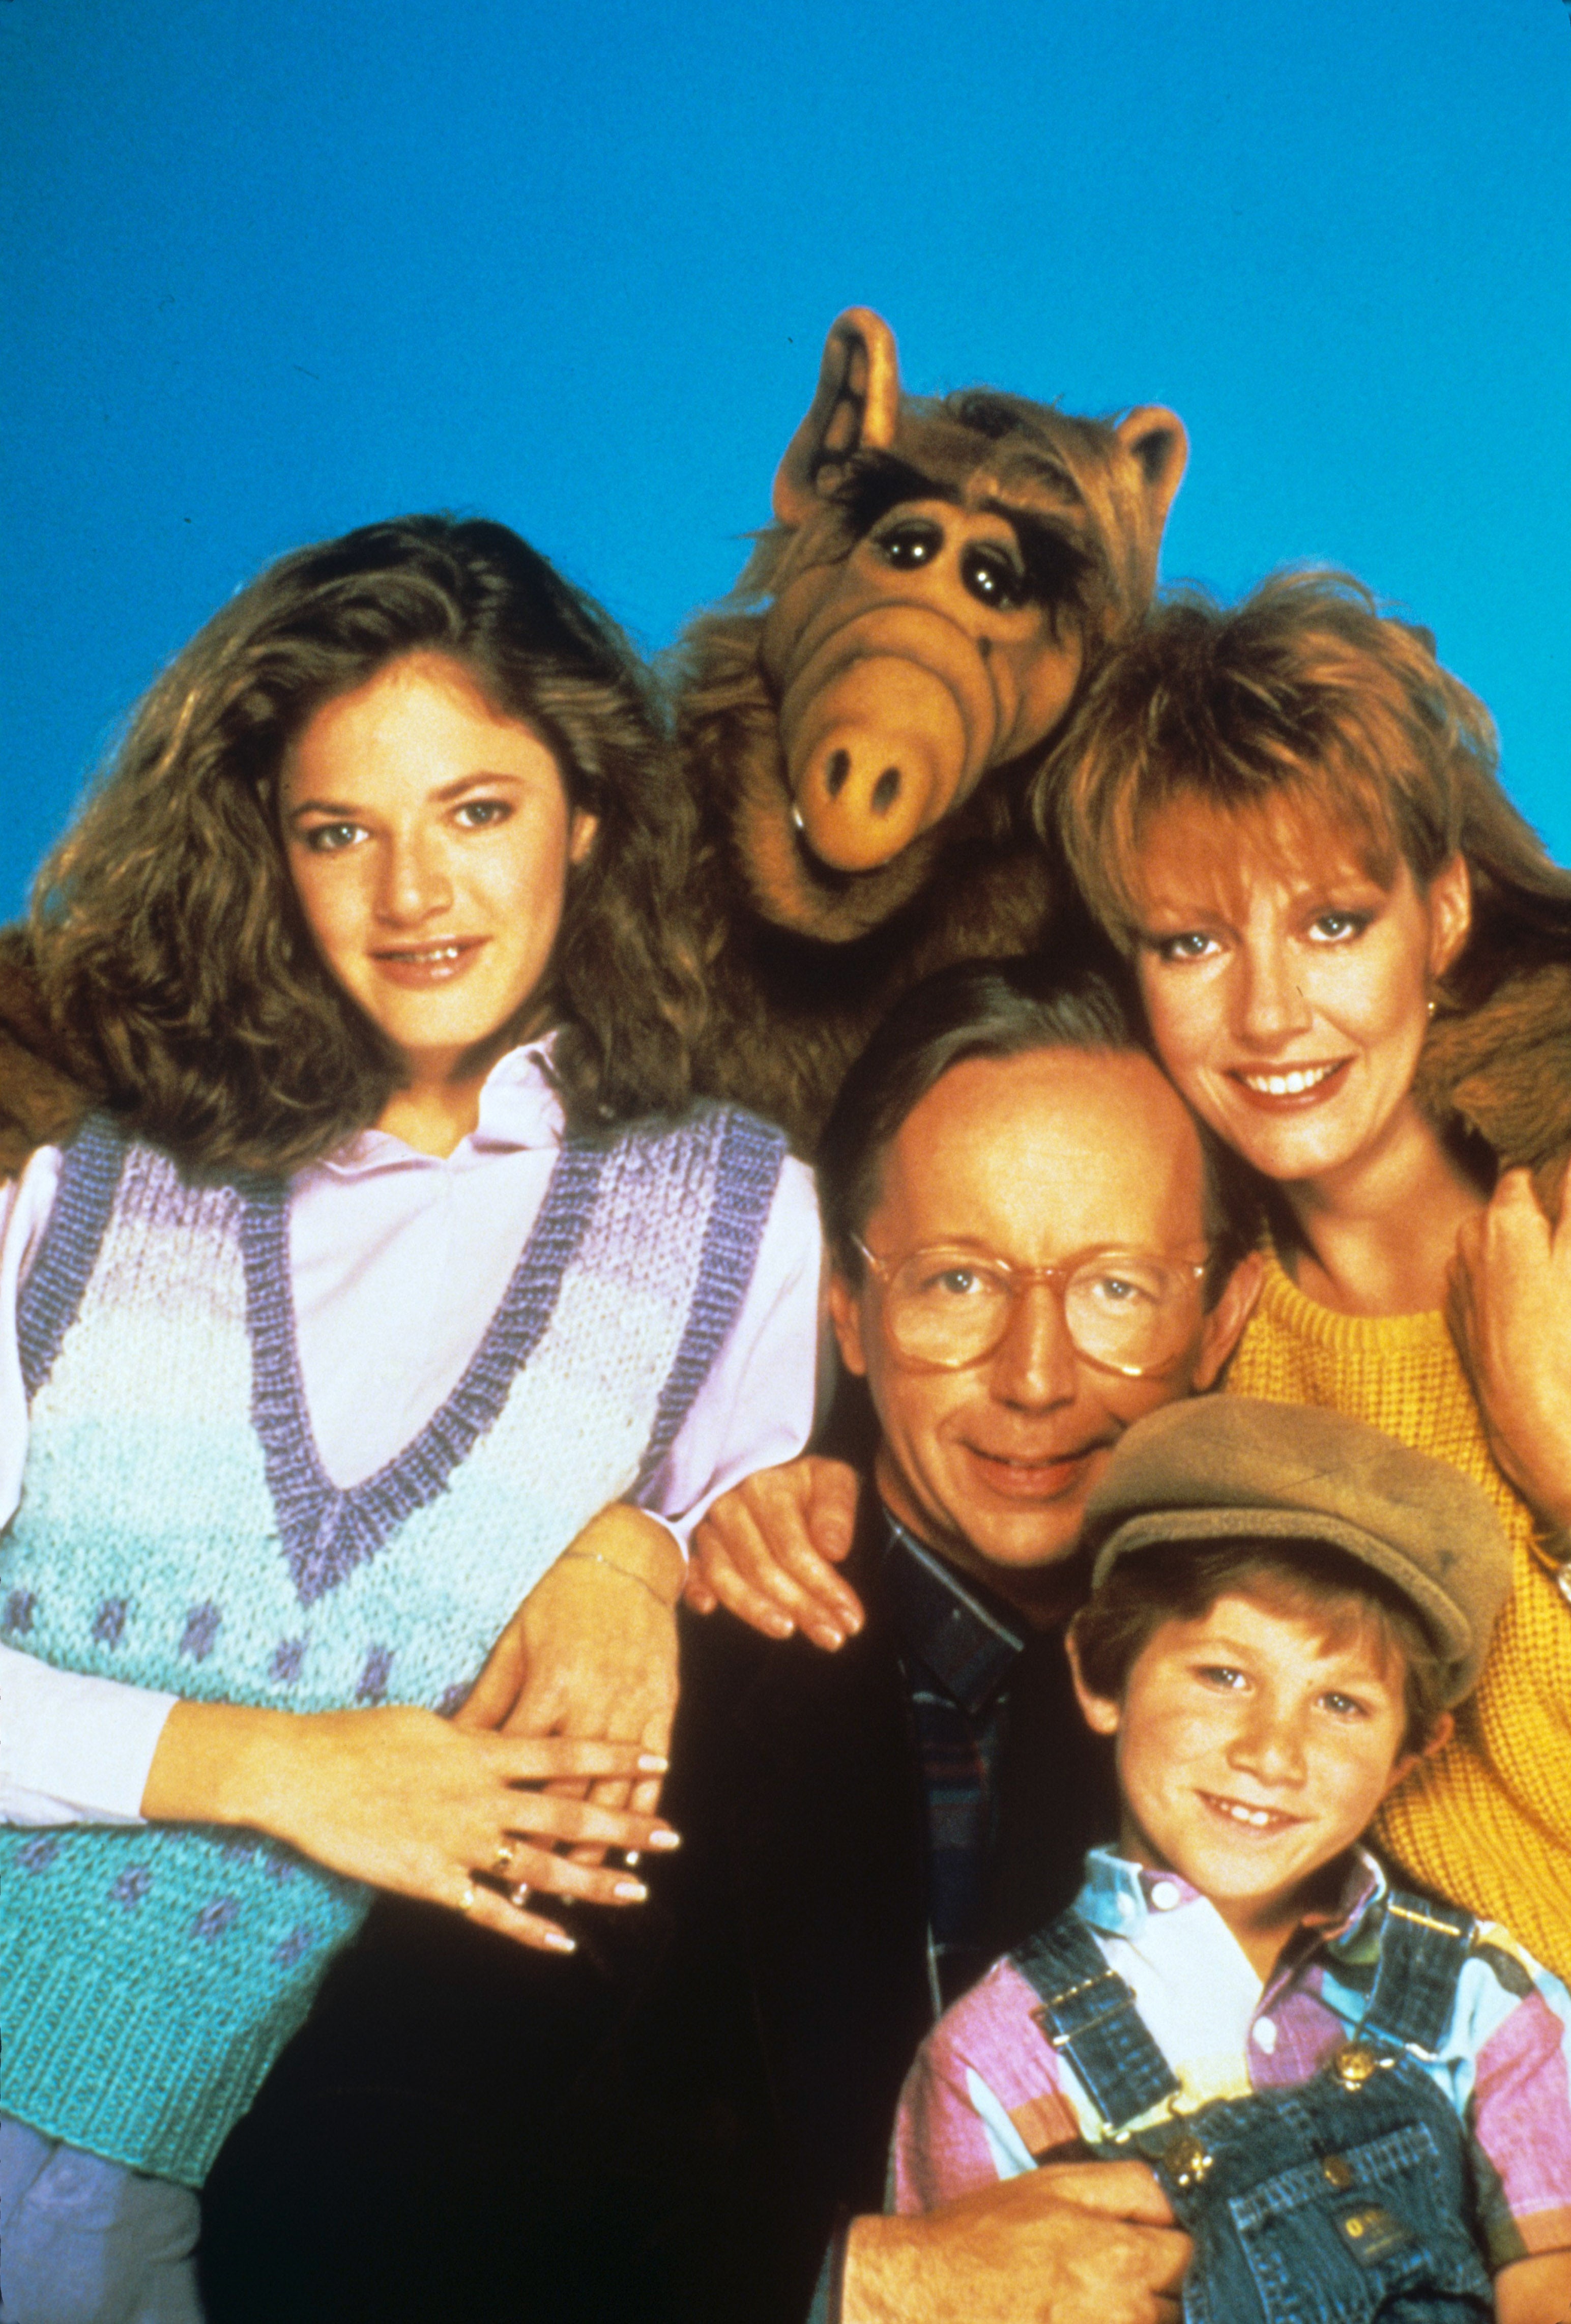 Benji Gregory played the Tanner family’s young son, Brian, in “ALF”